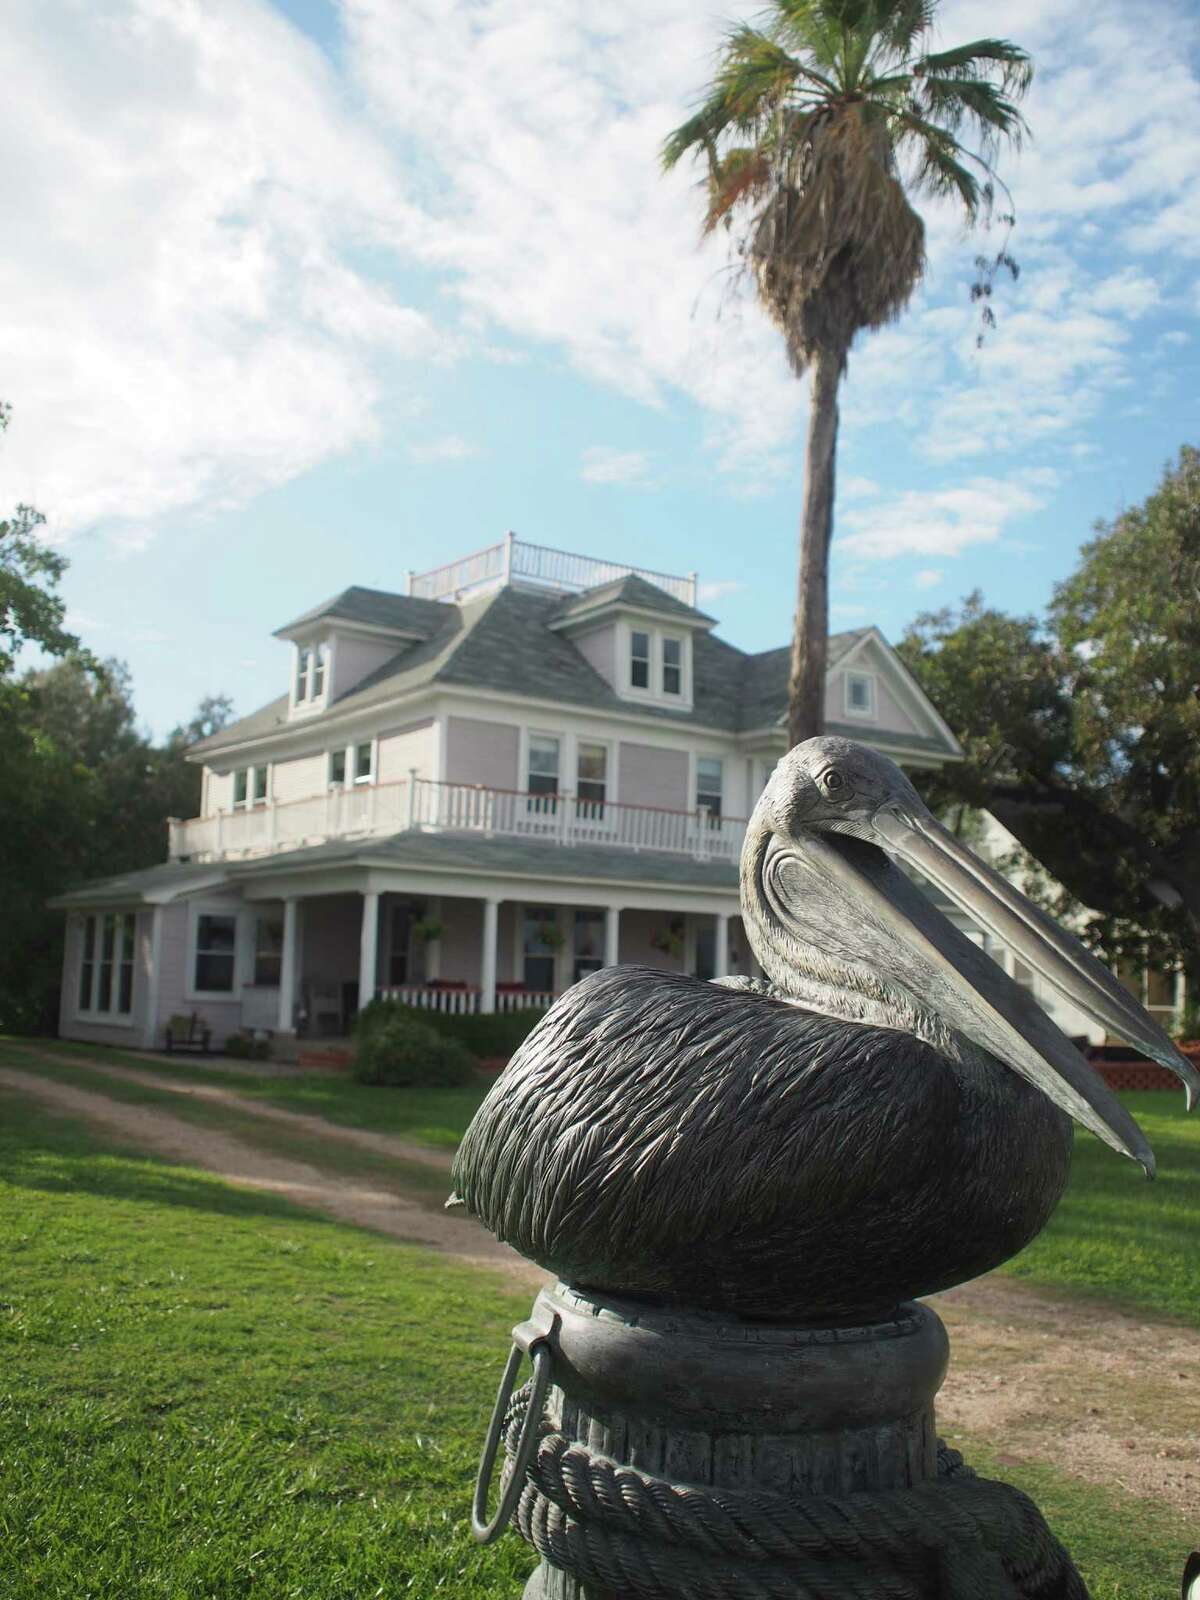 The Peaceful Pelican bed and breakfast in Palacios, Texas.